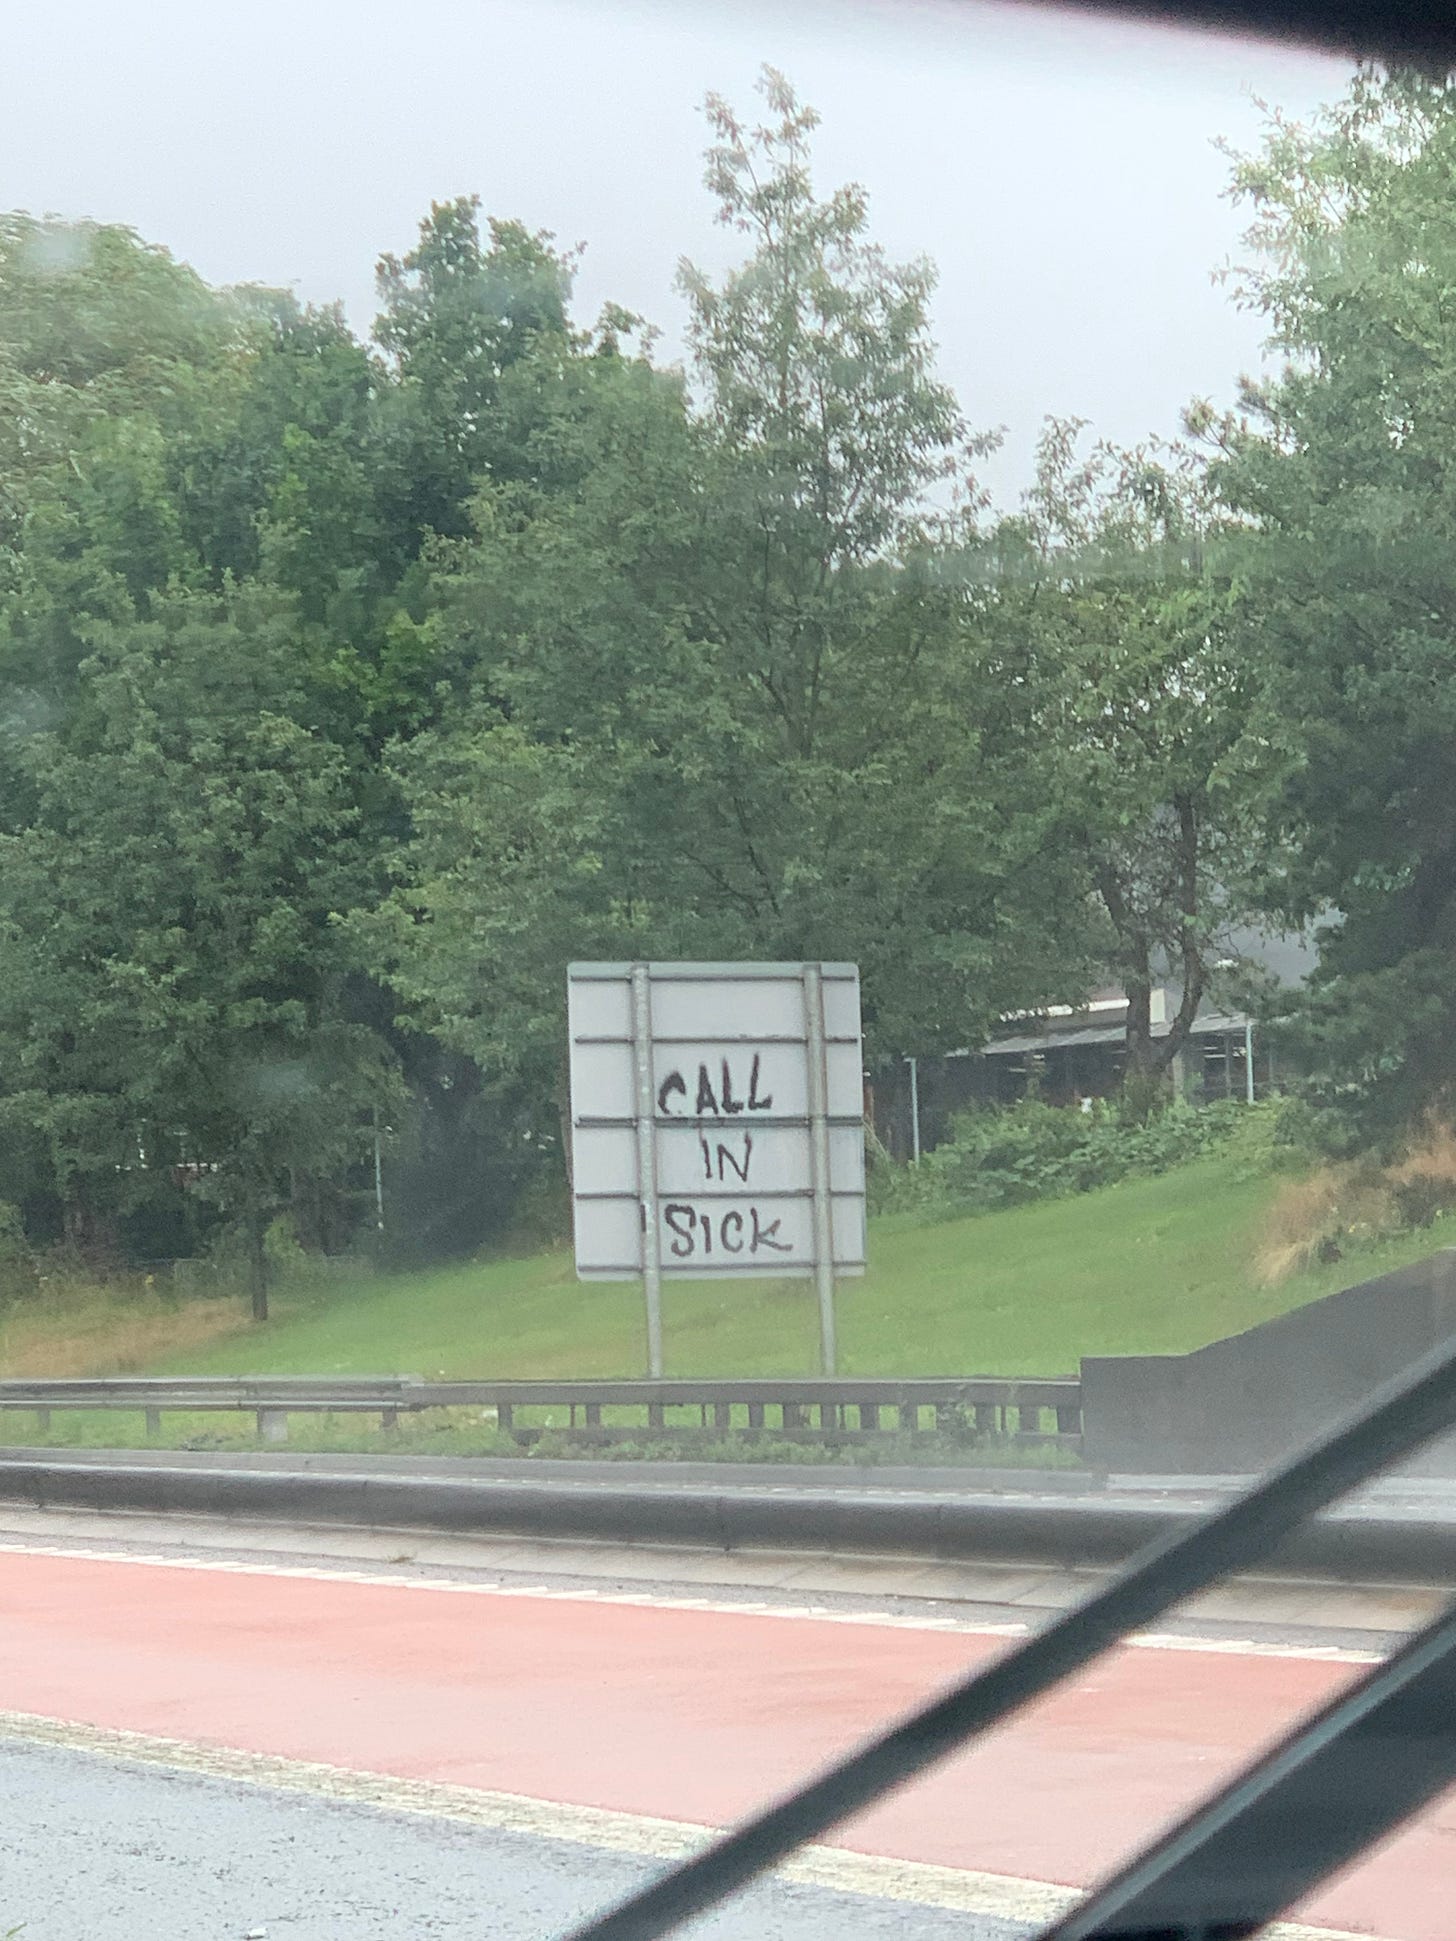 A photo take through a car windscreen on a motorway showing the back of a sign on the opposite side of the road. Graffiti on the sign says: call in sick.